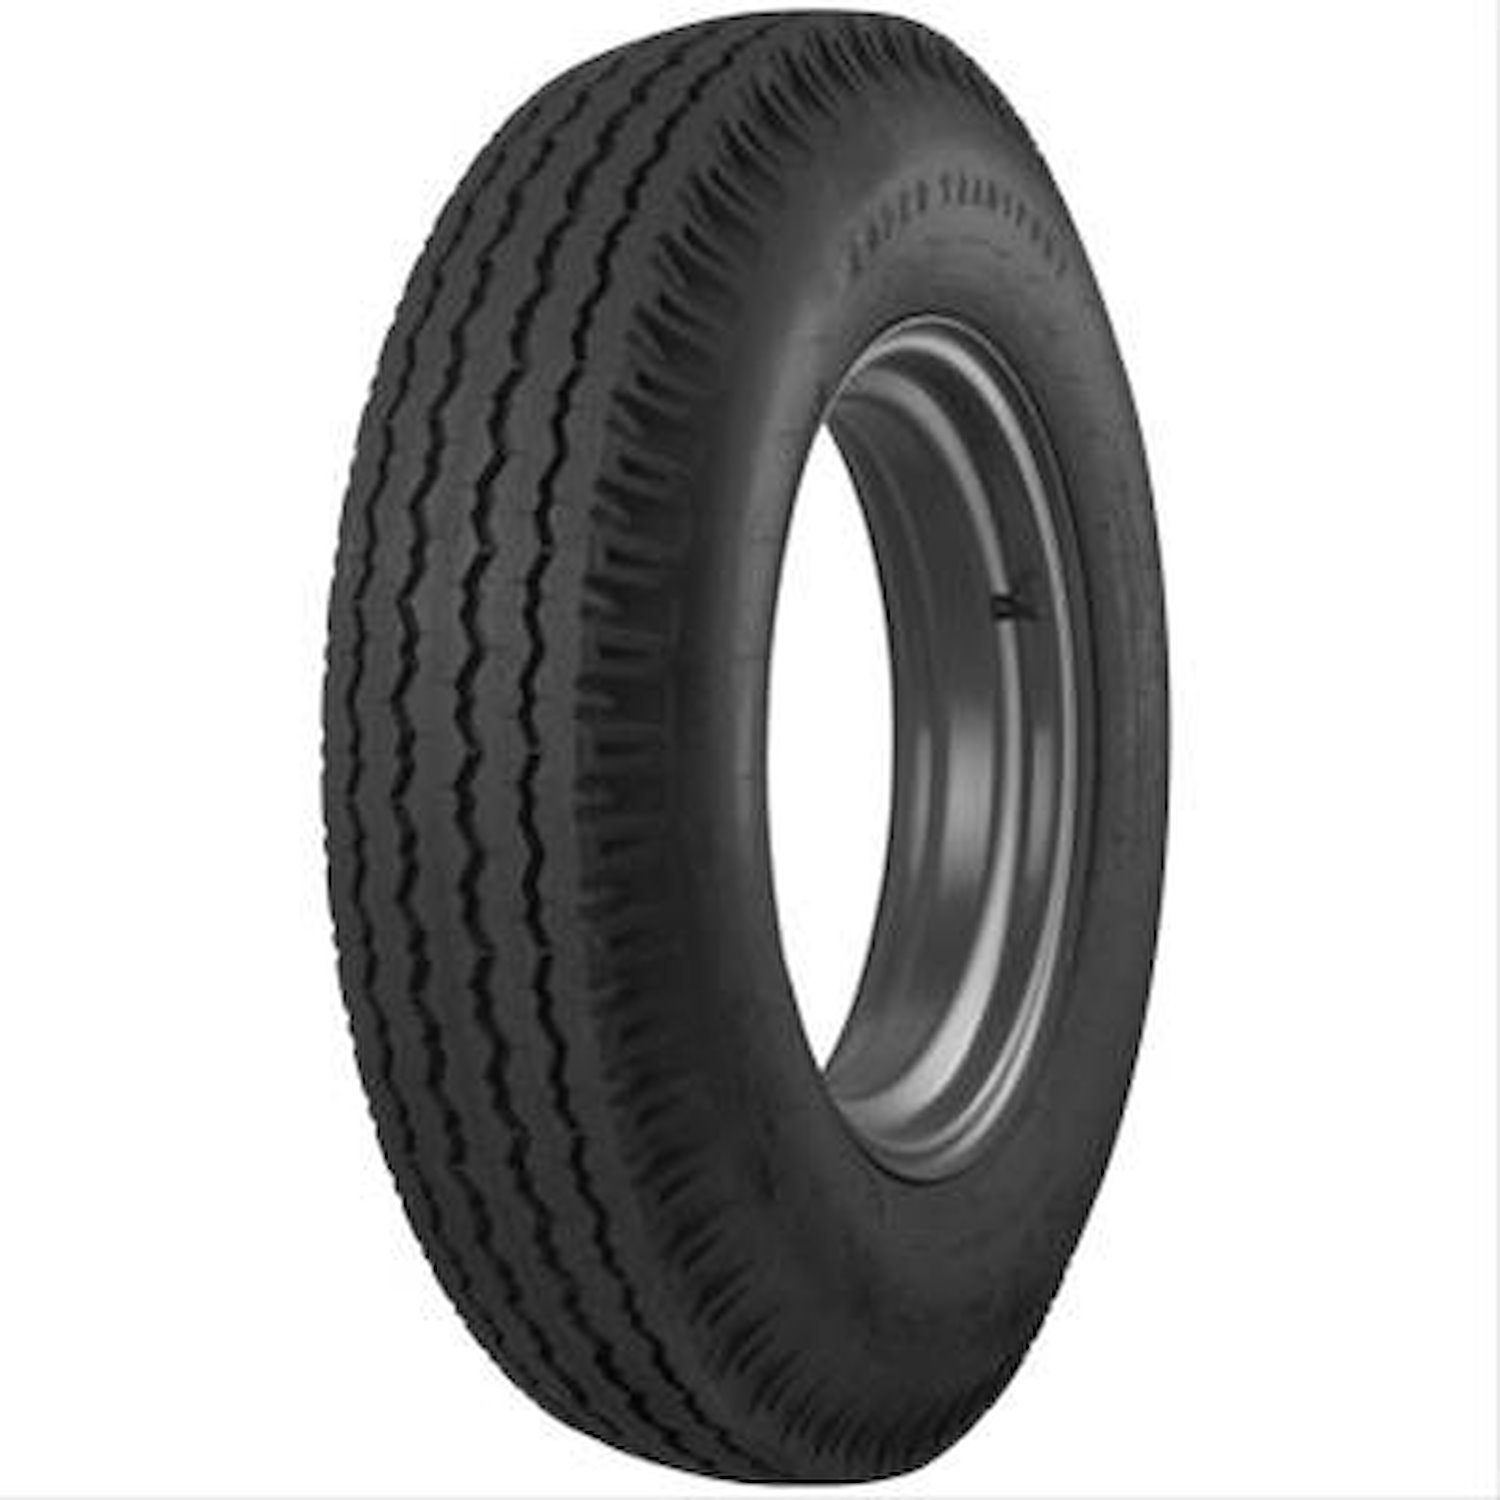 68757 Tire, STA Transport Highway, 750-16 10-Ply